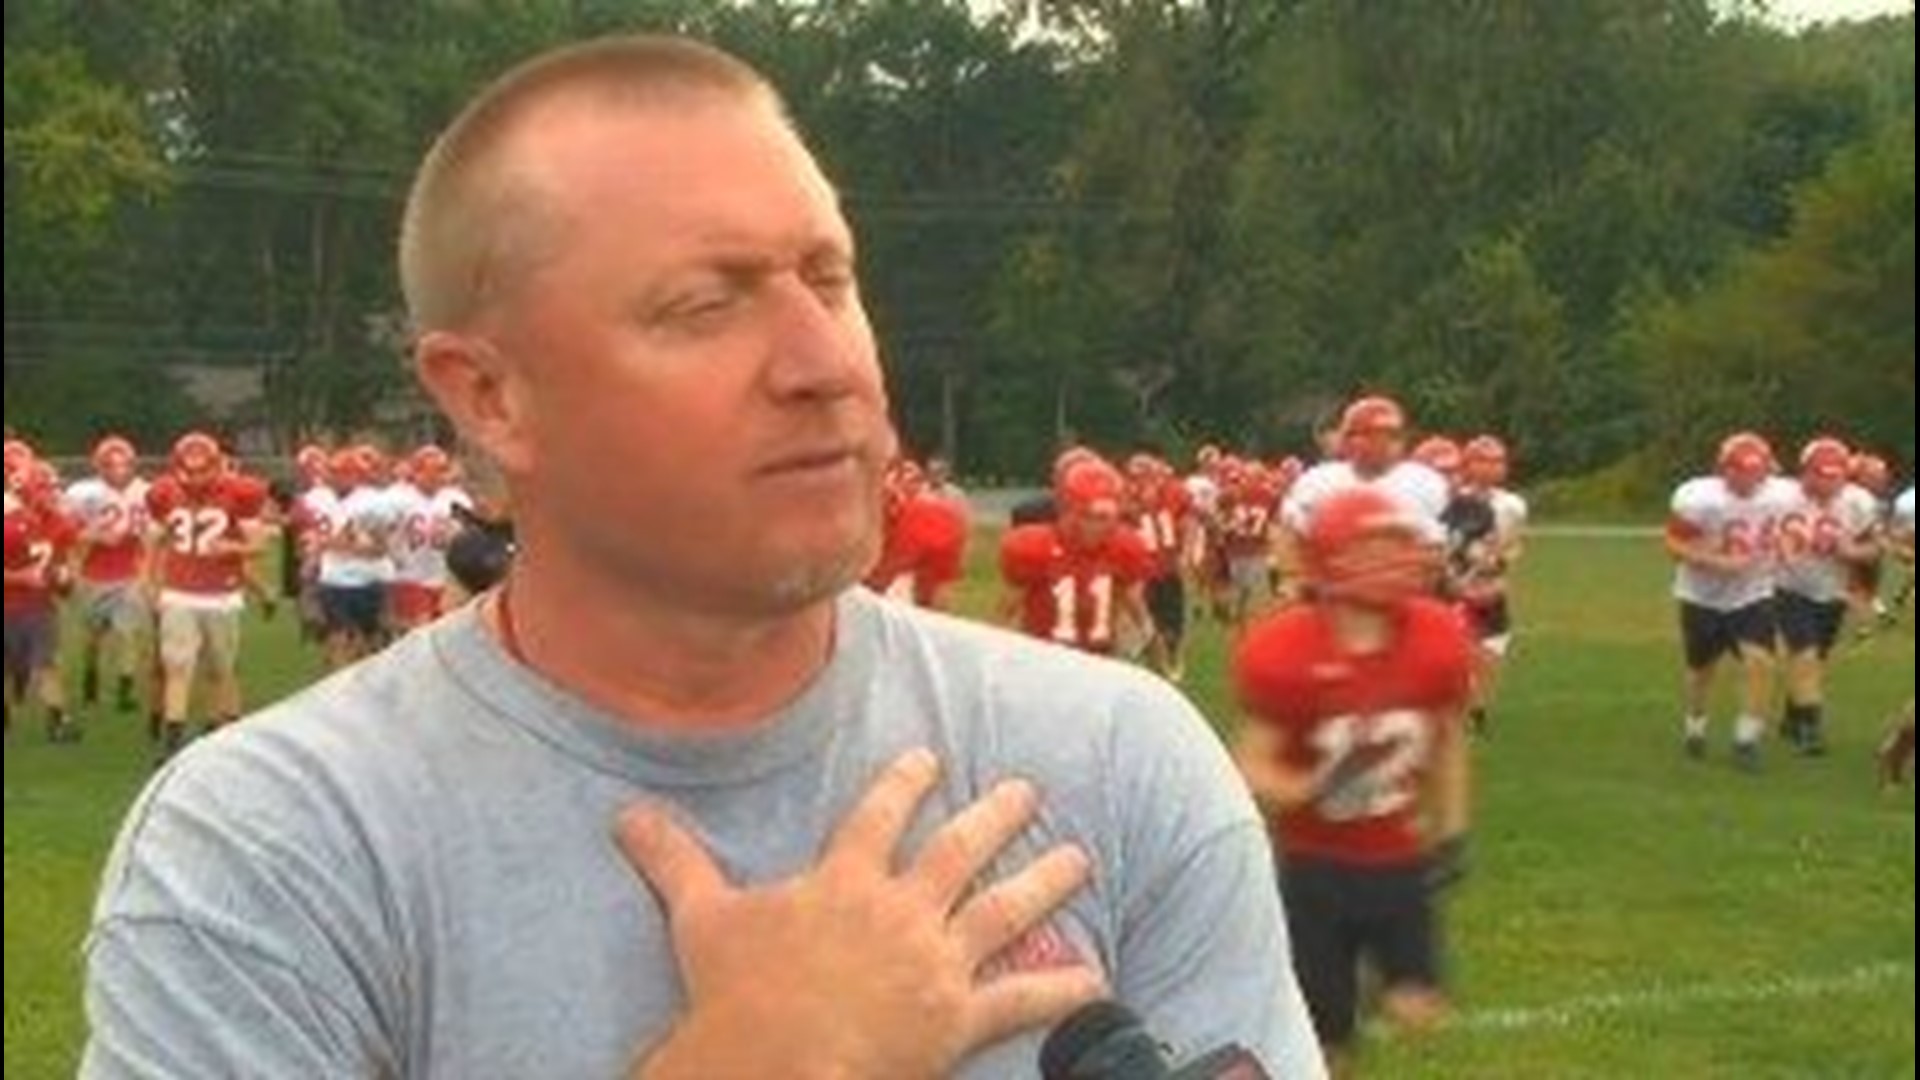 RAW: Bedford coach, Jeff Wood, speaks exclusively to WTOL on suspensions